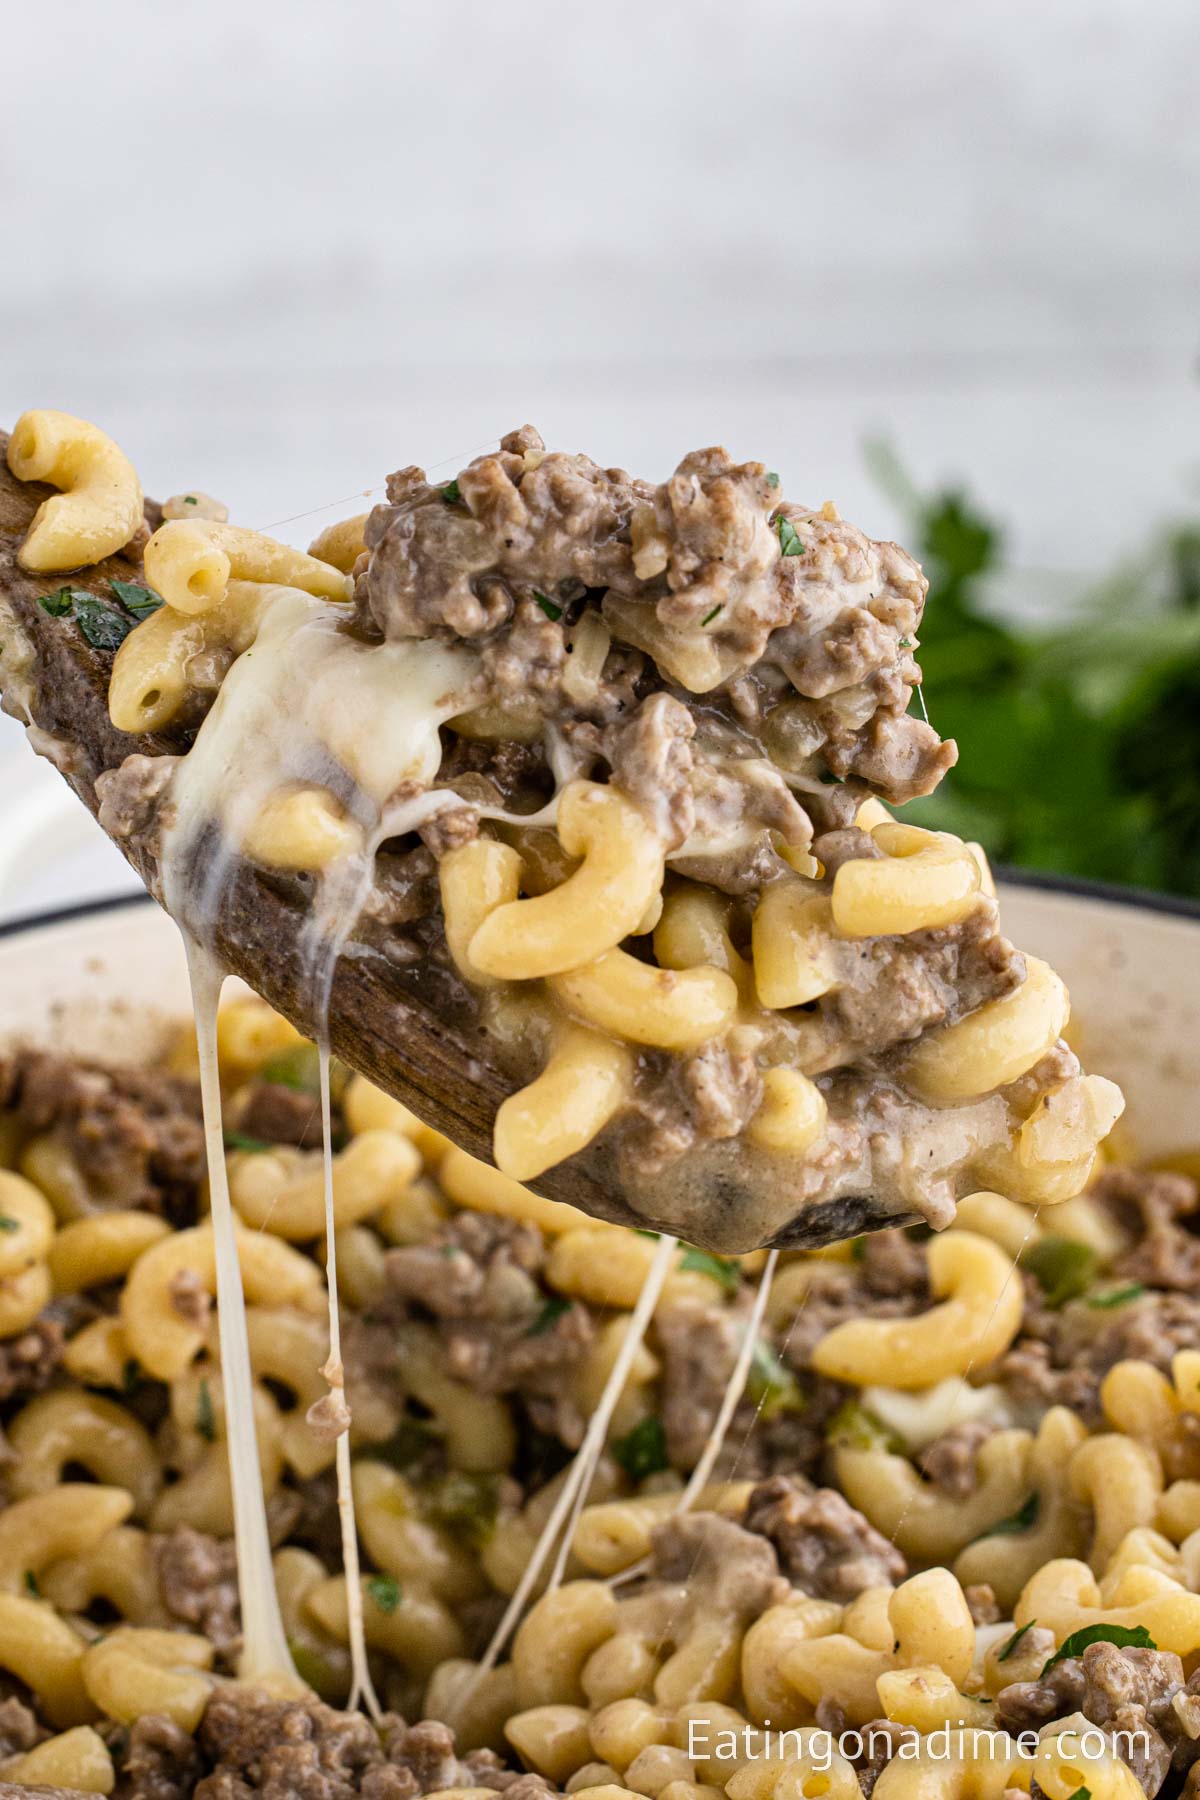 Skillet Philly Cheesesteak Pasta with a serving on the wooden spoon